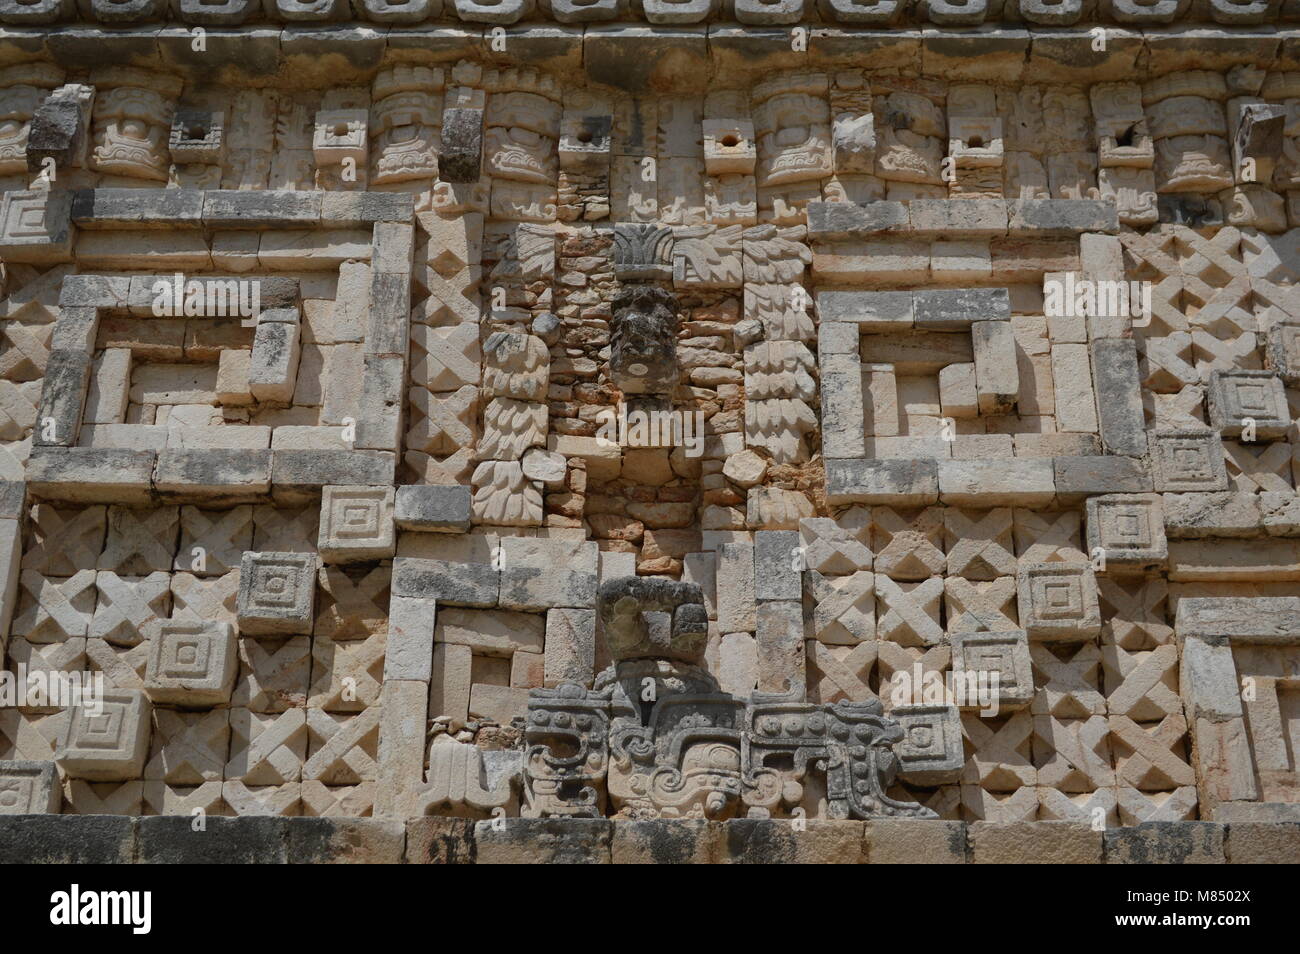 Mayan carvings of the Governor's Palace at Uxmal, Mexico Stock Photo